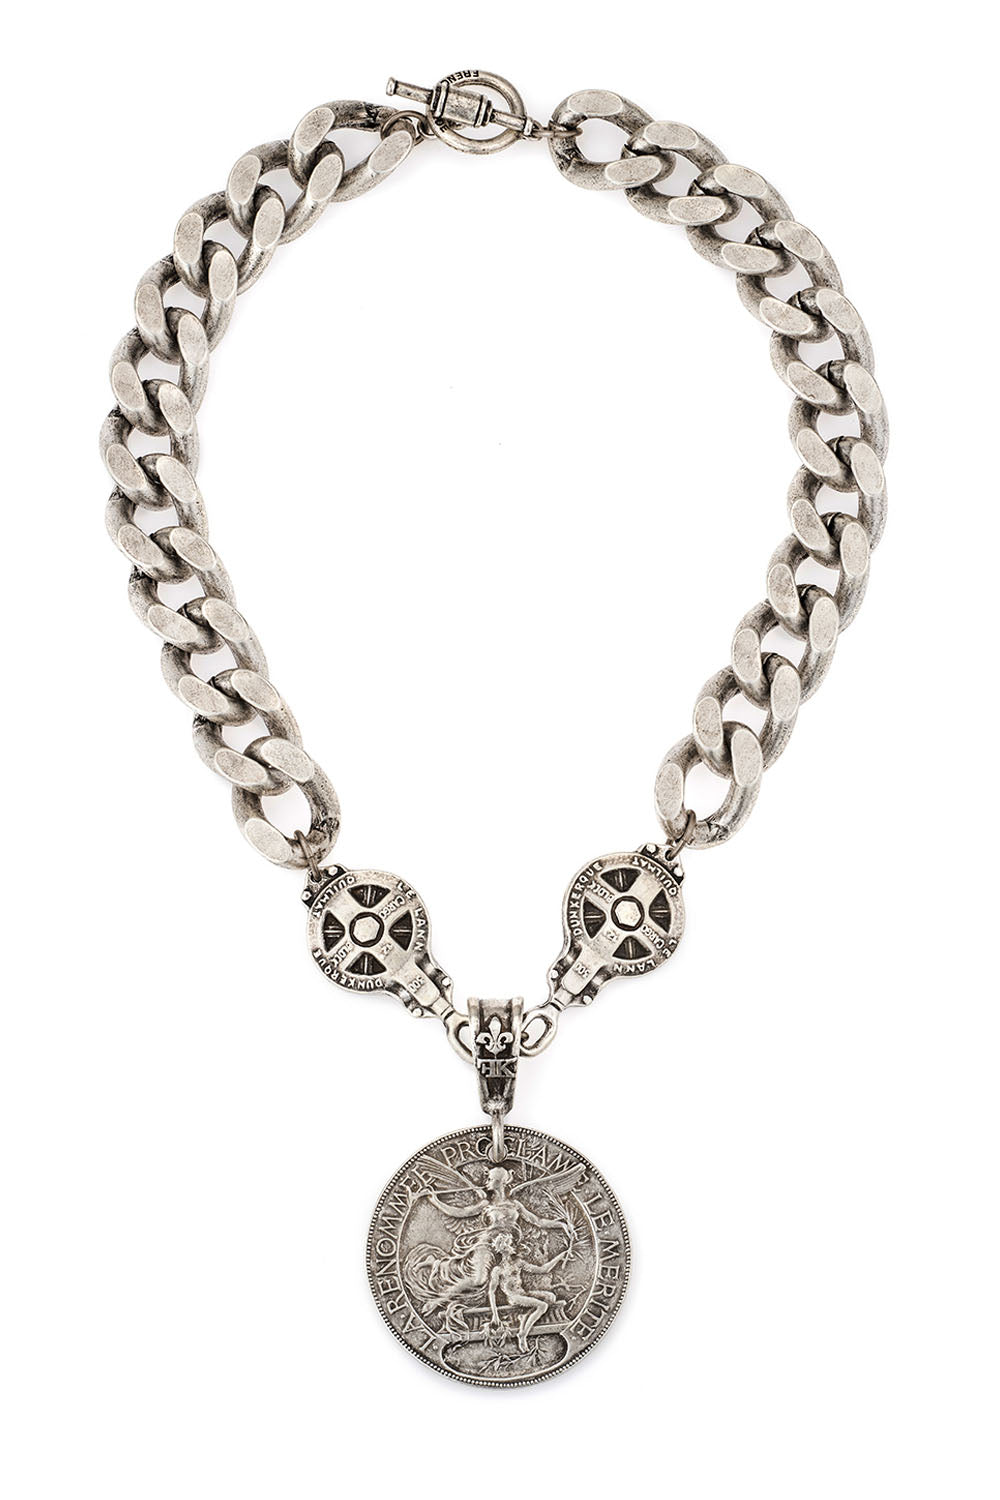 SILVER BEVEL CHAIN WITH DUNKERQUE AND LAREN MEDALLIONS